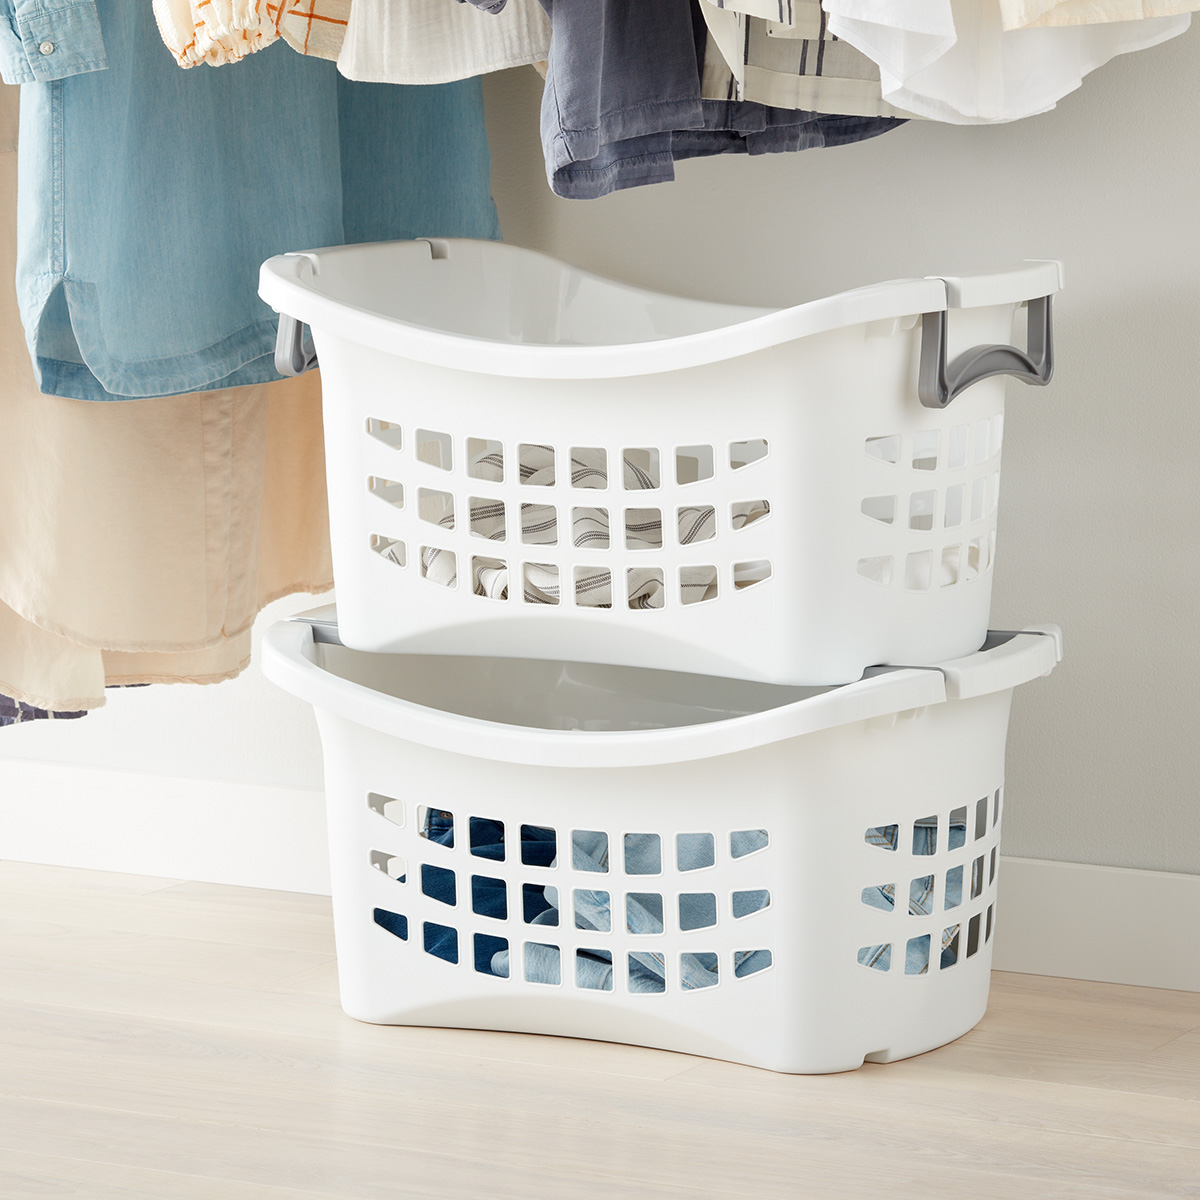 https://www.containerstore.com/catalogimages/450328/10055086_Sterilite_Stacking_Laundry_.jpg